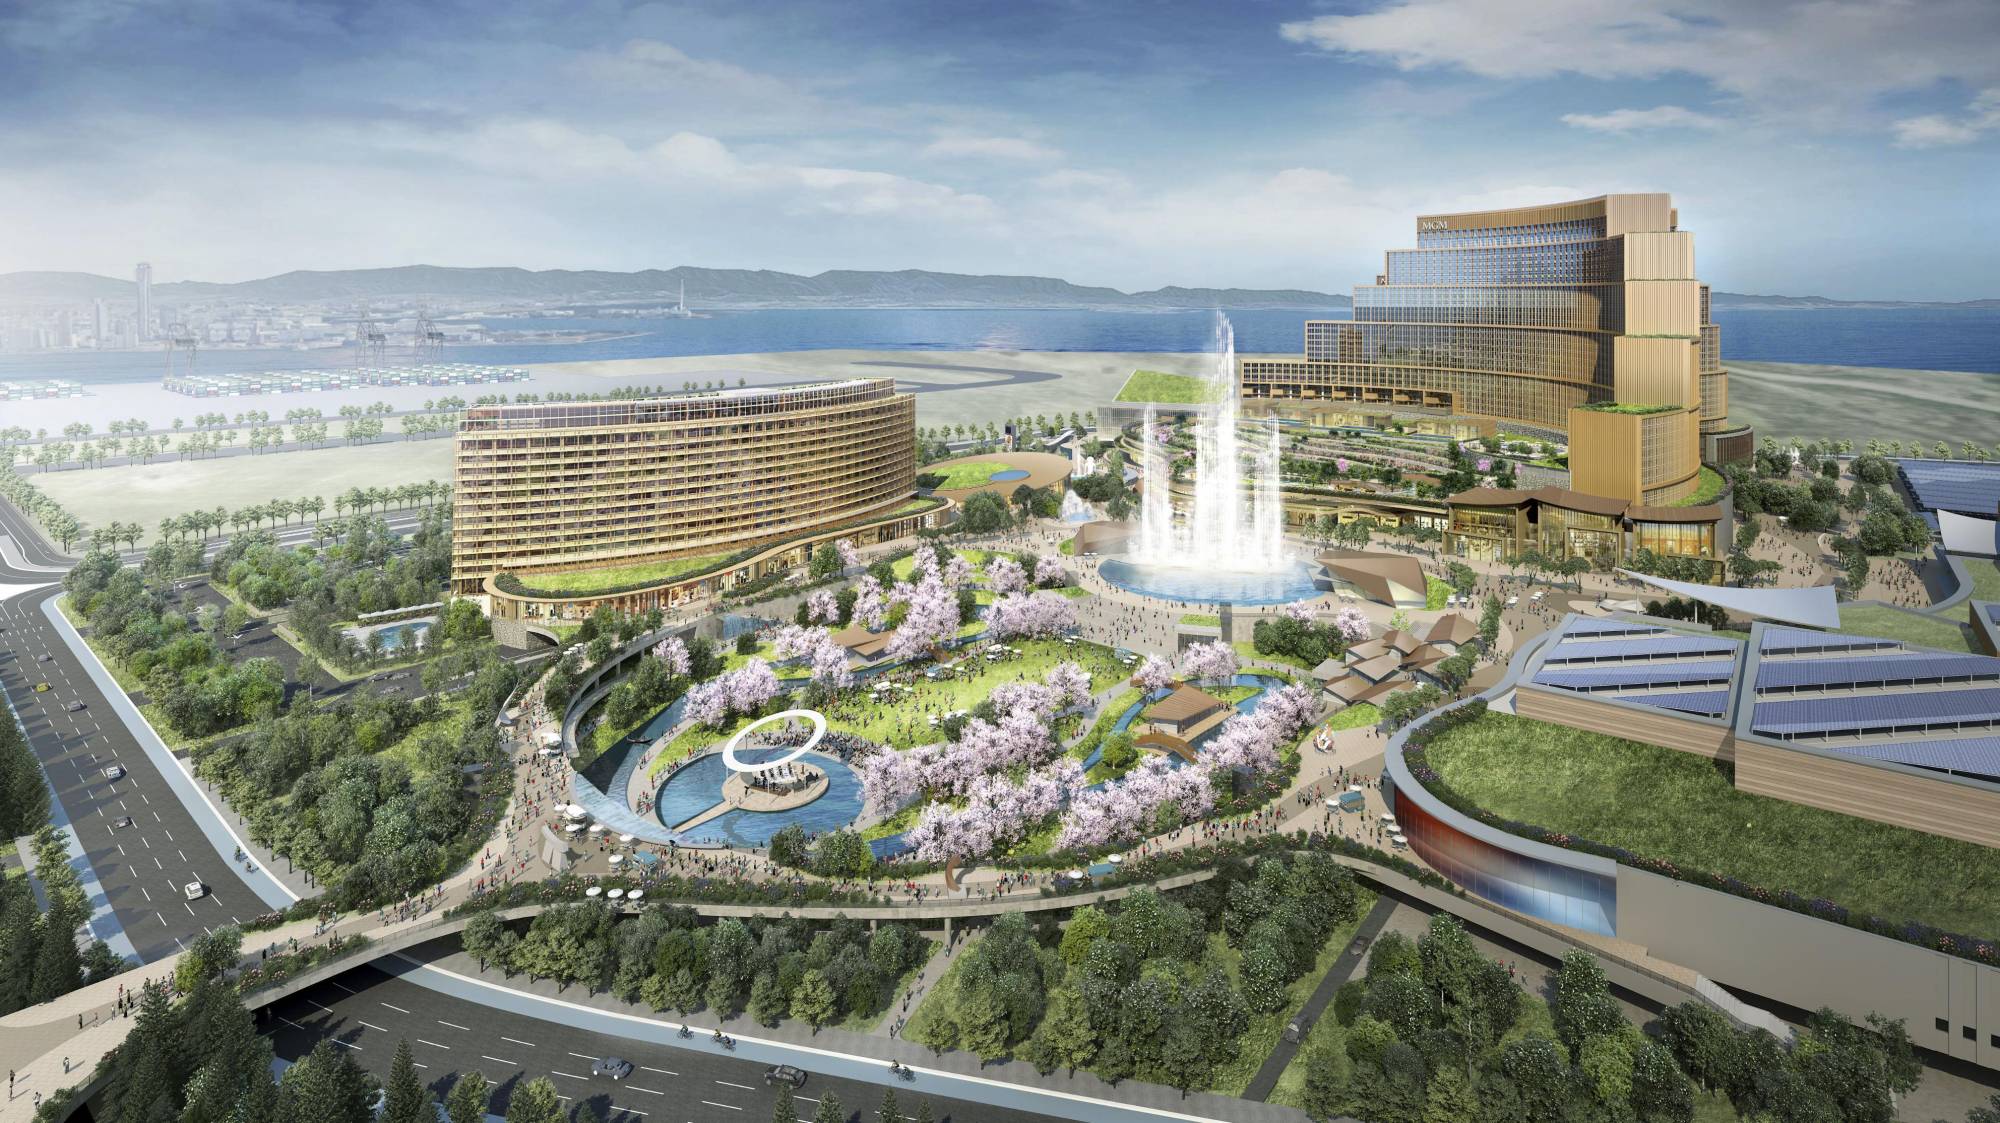 An artist's impression of an integrated casino complex planned for construction in Osaka. | COURTESY OF MGM RESORTS INTERNATIONAL AND ORIX CORP. / VIA KYODO